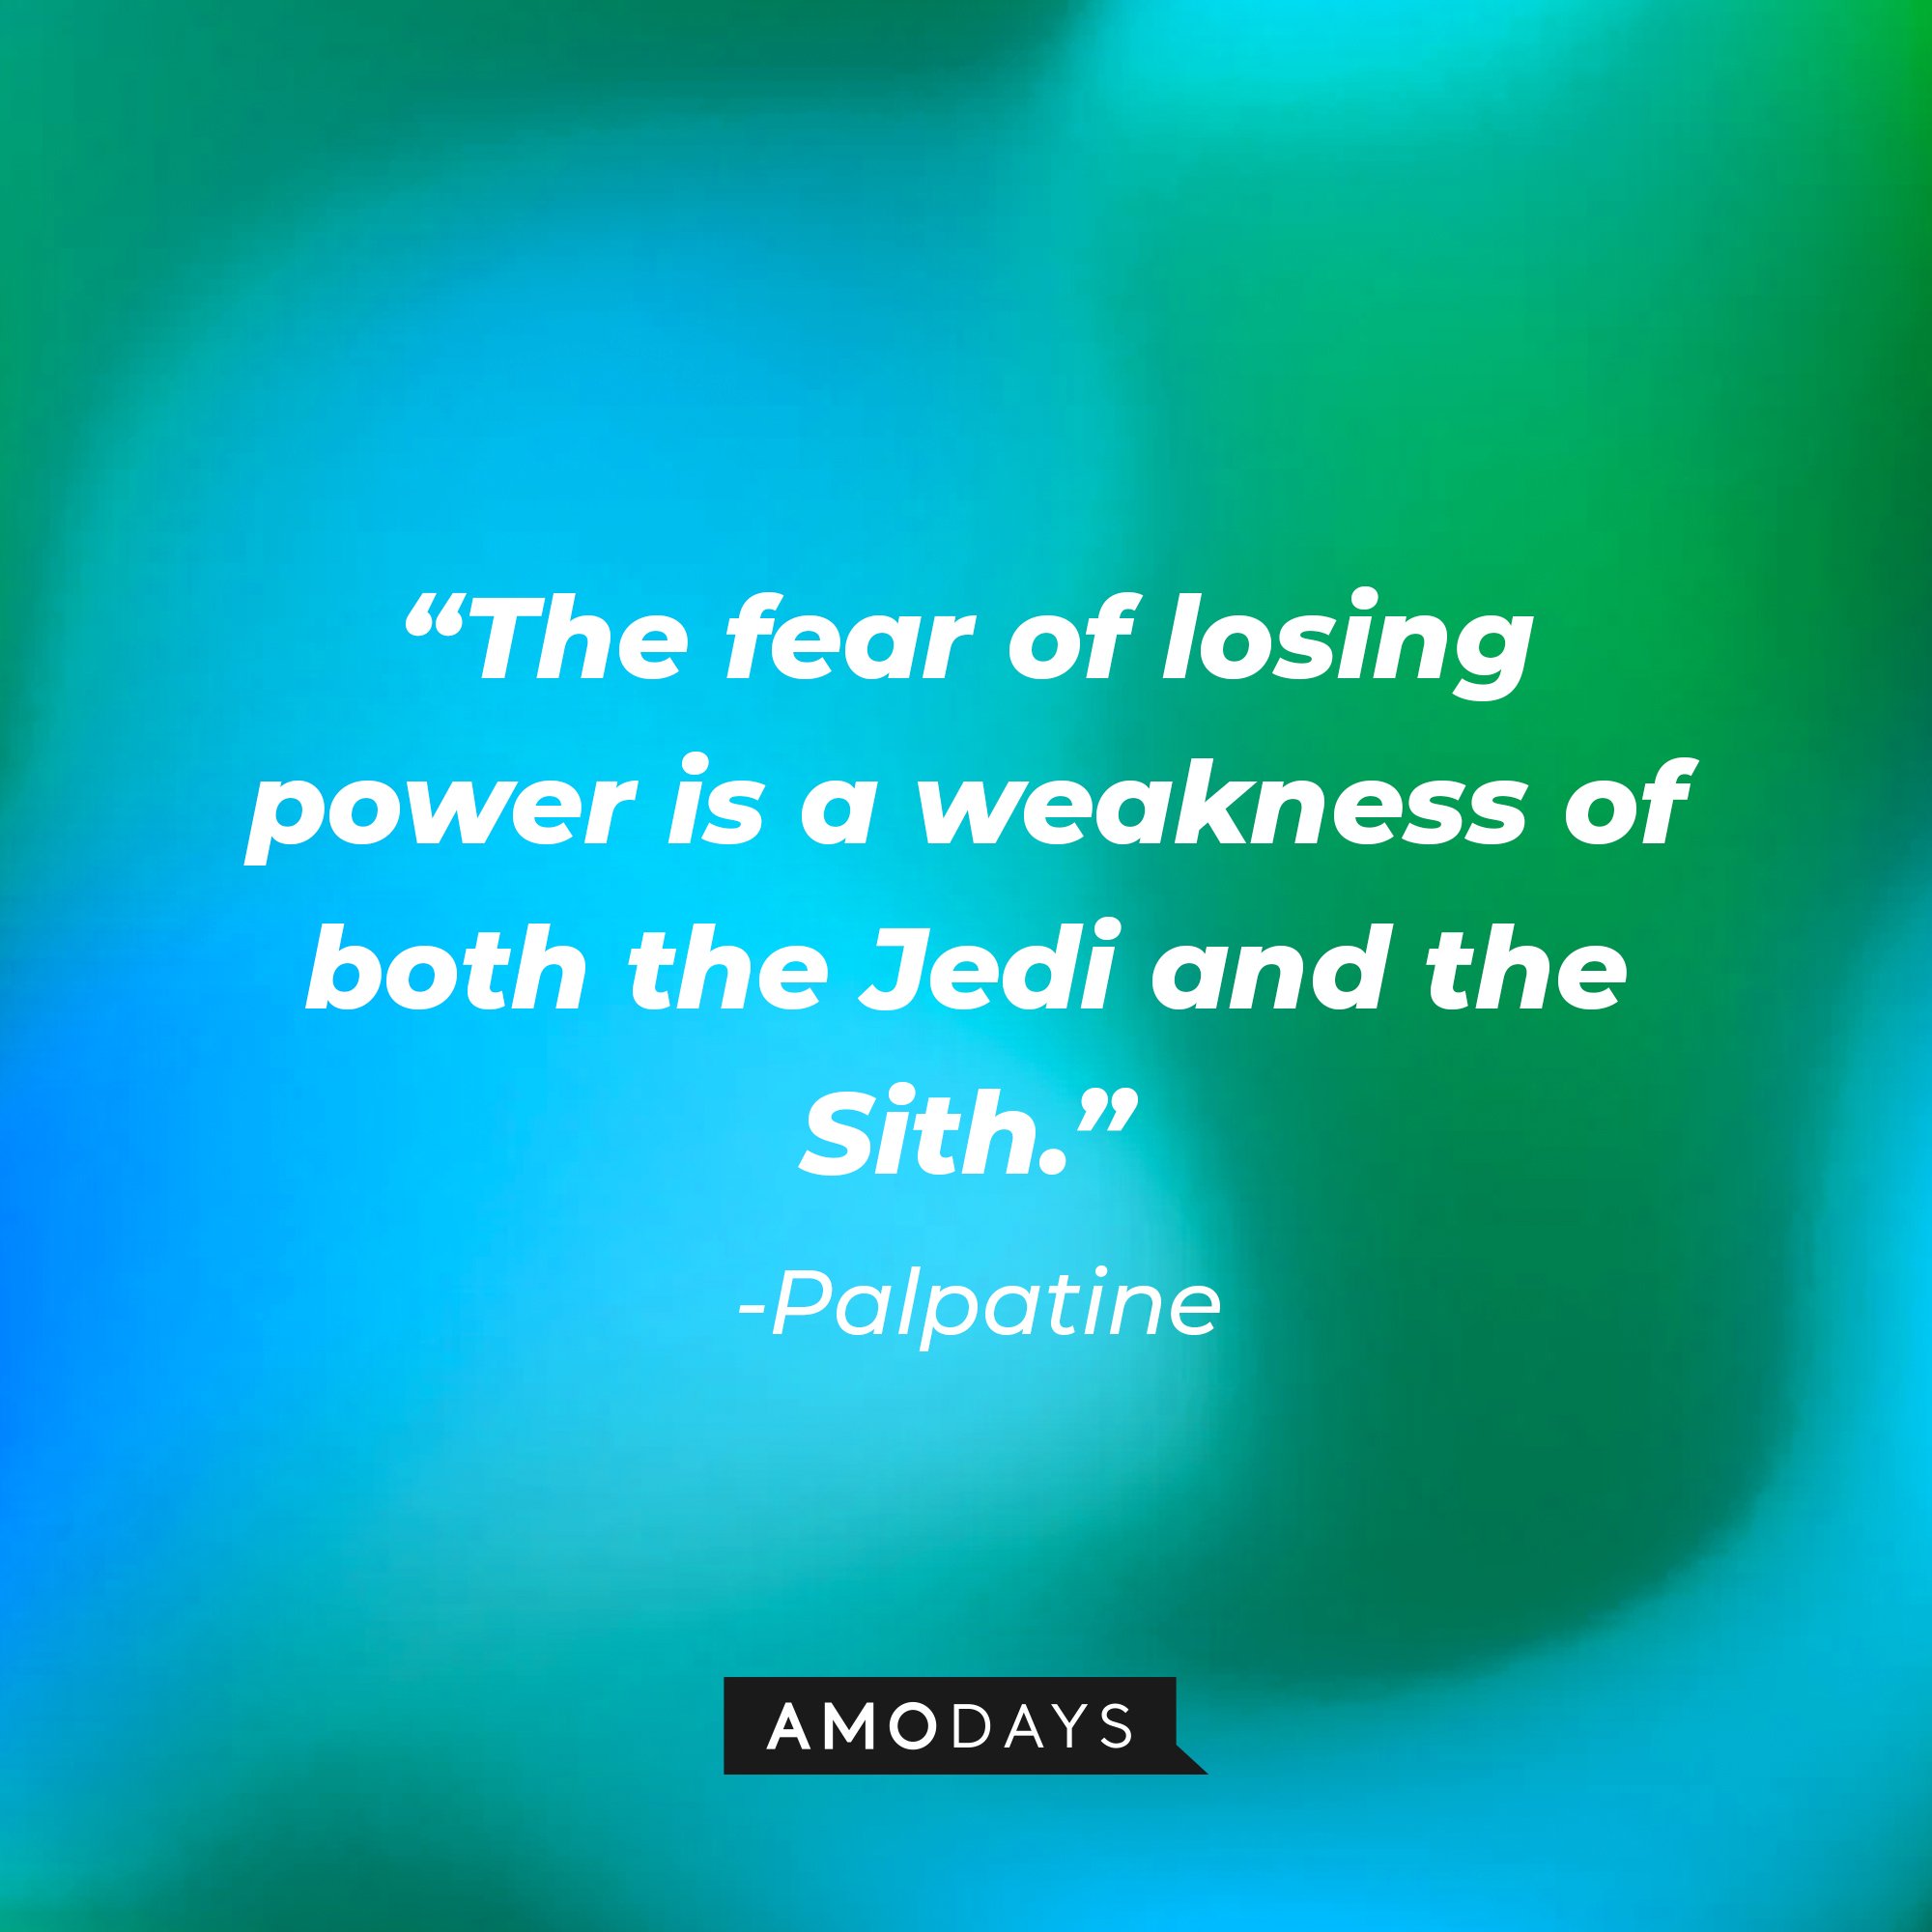 Palpatine's quote: “The fear of losing power is a weakness of both the Jedi and the Sith.” | Image: AmoDays